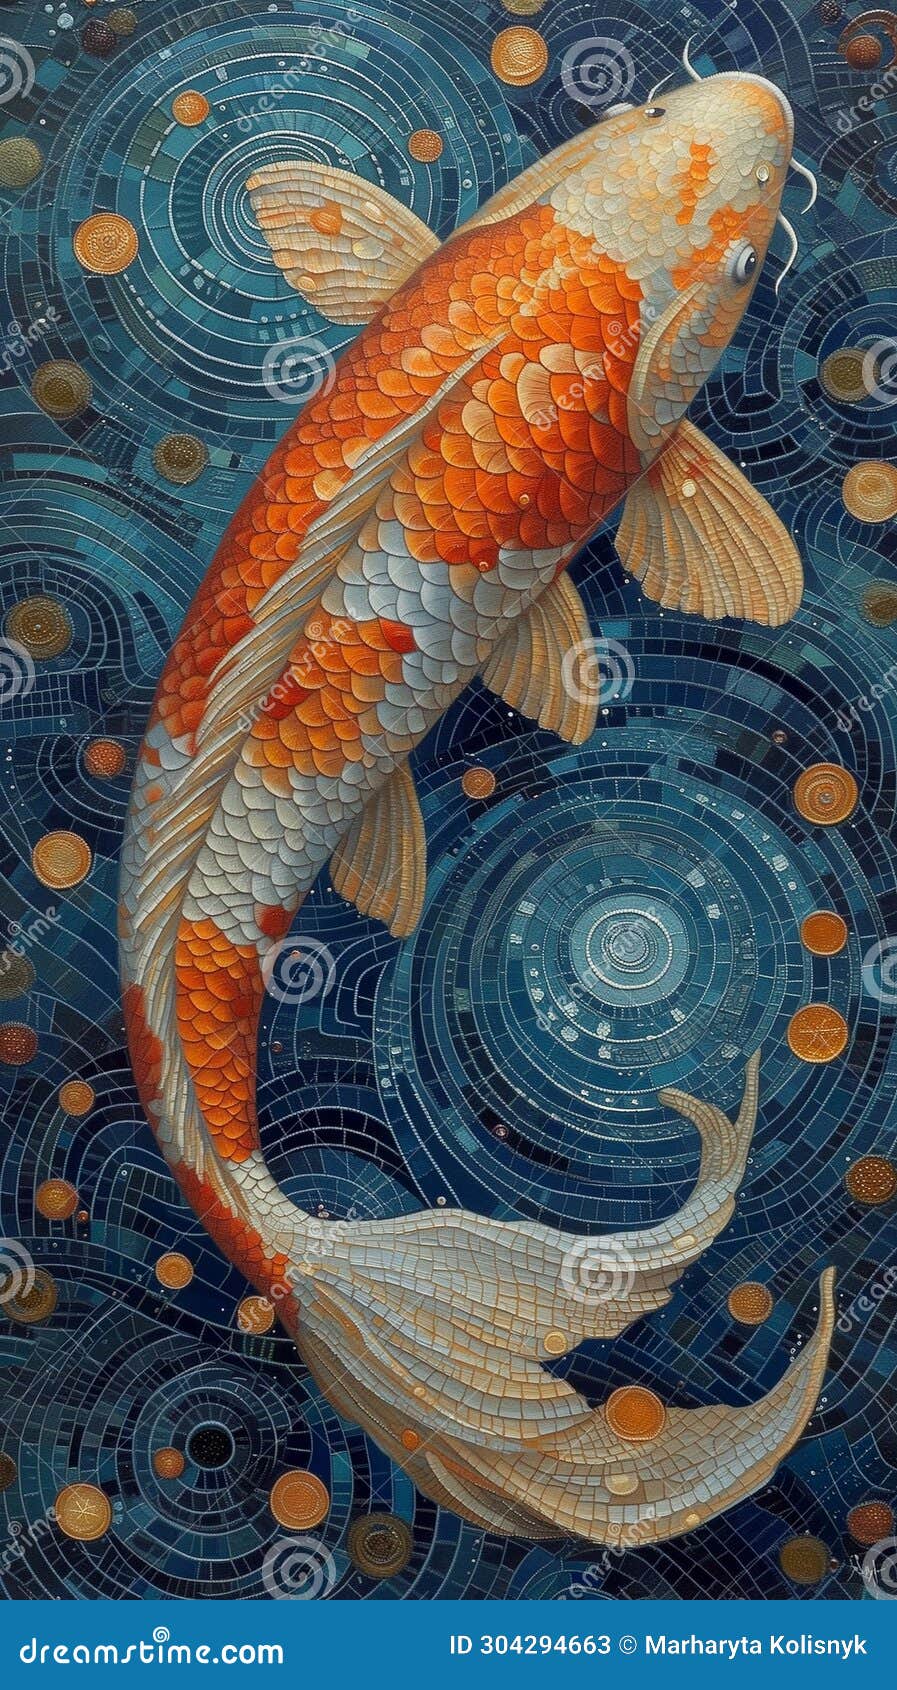 A Koi Fish, Its Scales a Mosaic of Orange and White Dots 1 Stock  Illustration - Illustration of aquarium, crowded: 304294663